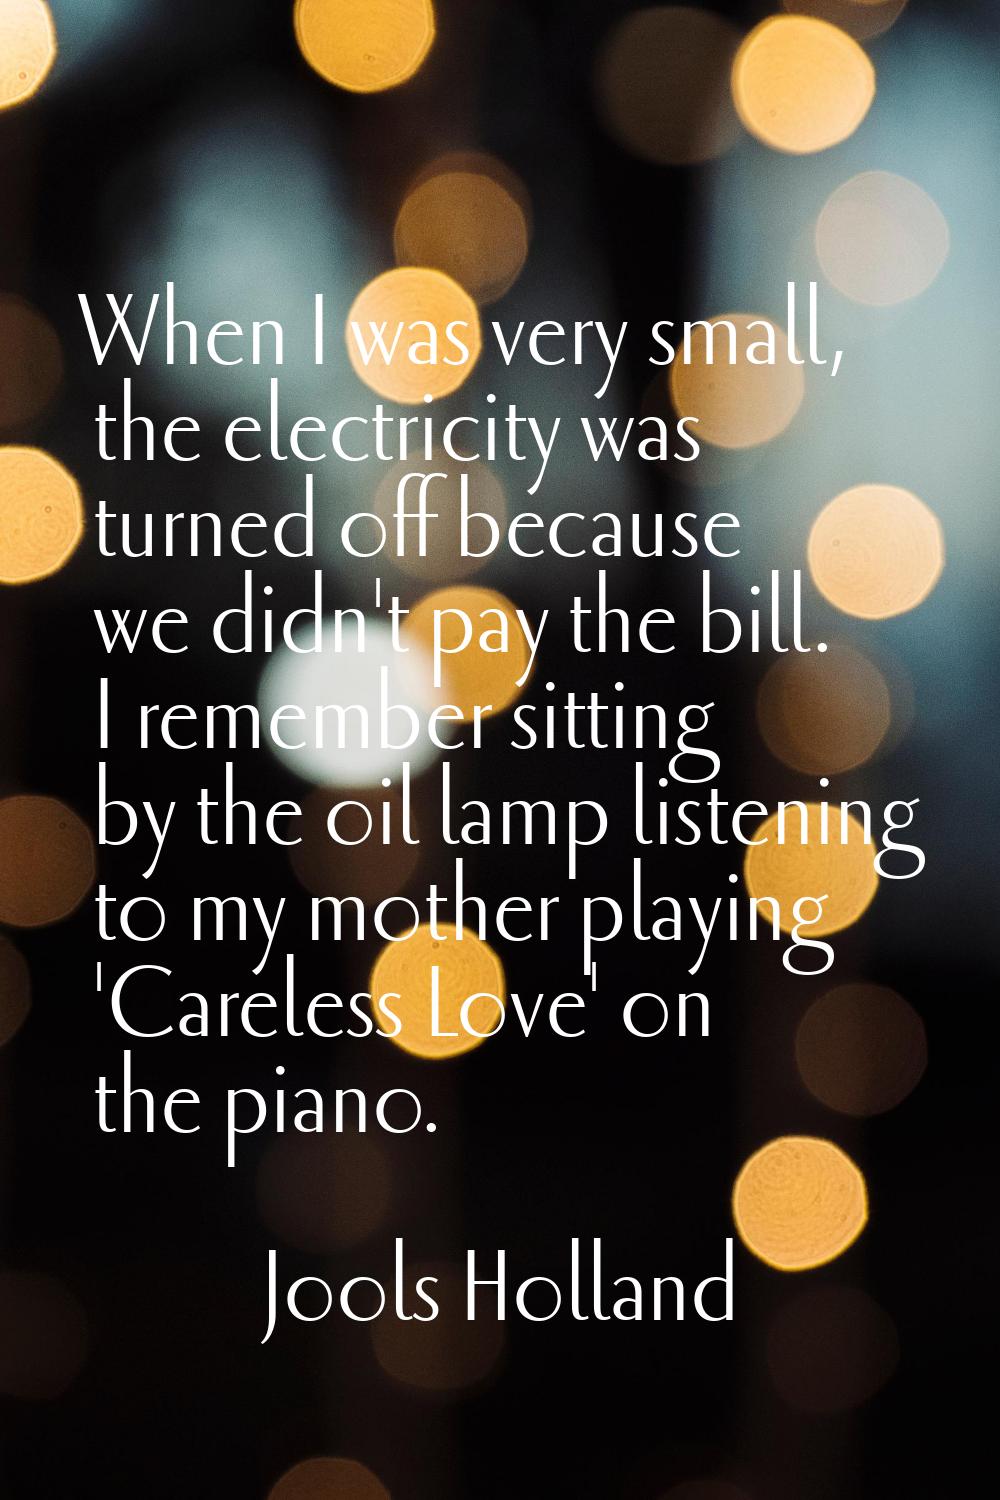 When I was very small, the electricity was turned off because we didn't pay the bill. I remember si